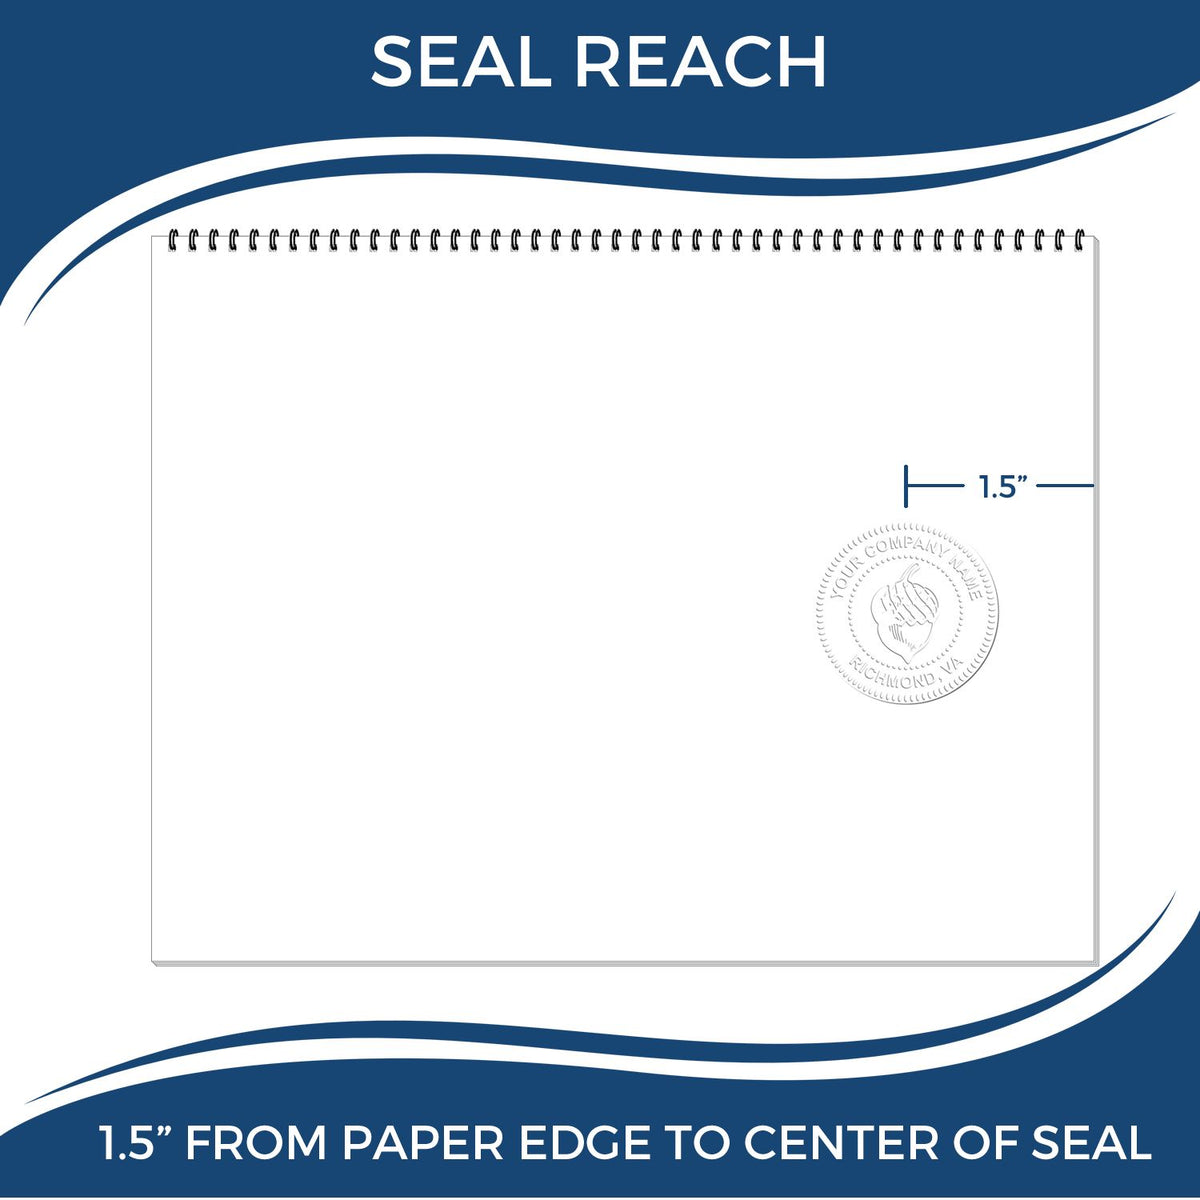 An infographic showing the seal reach which is represented by a ruler and a miniature seal image of the Handheld Vermont Professional Engineer Embosser